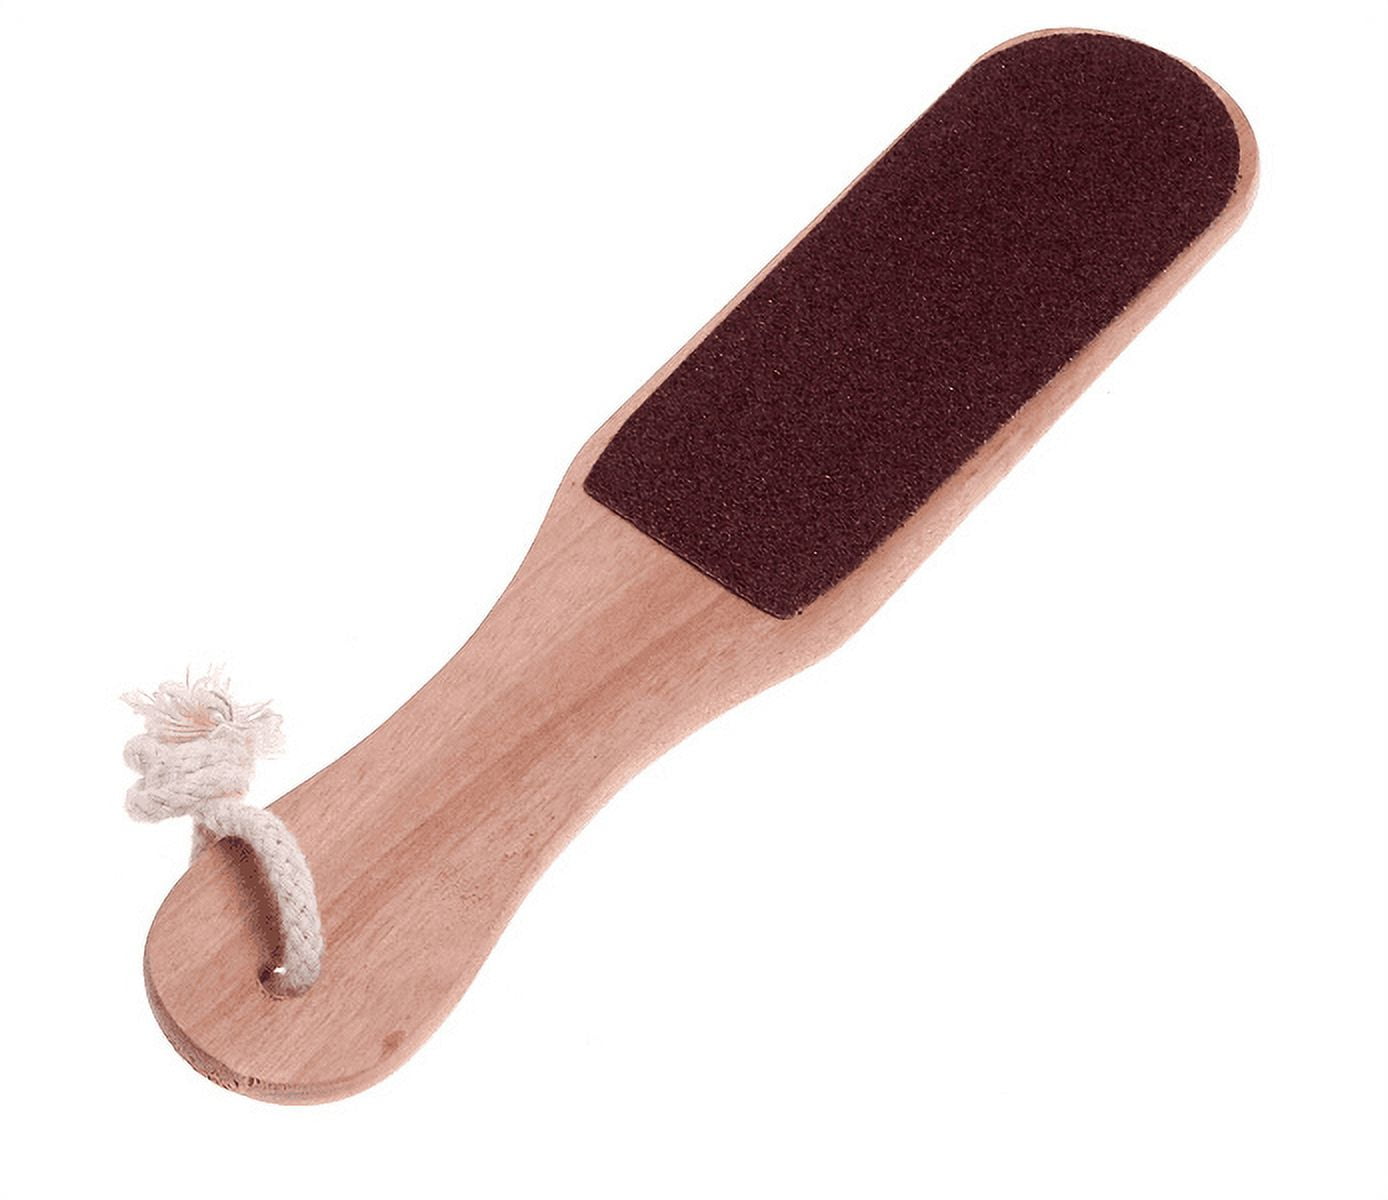  Foot Scrubber Foot File Two Side Dead Skin Callus Remover for  Feet Professional Stainless Steel Heel Scraper Pedicure Tools for Wet and  Dry Feet,Brown : Beauty & Personal Care